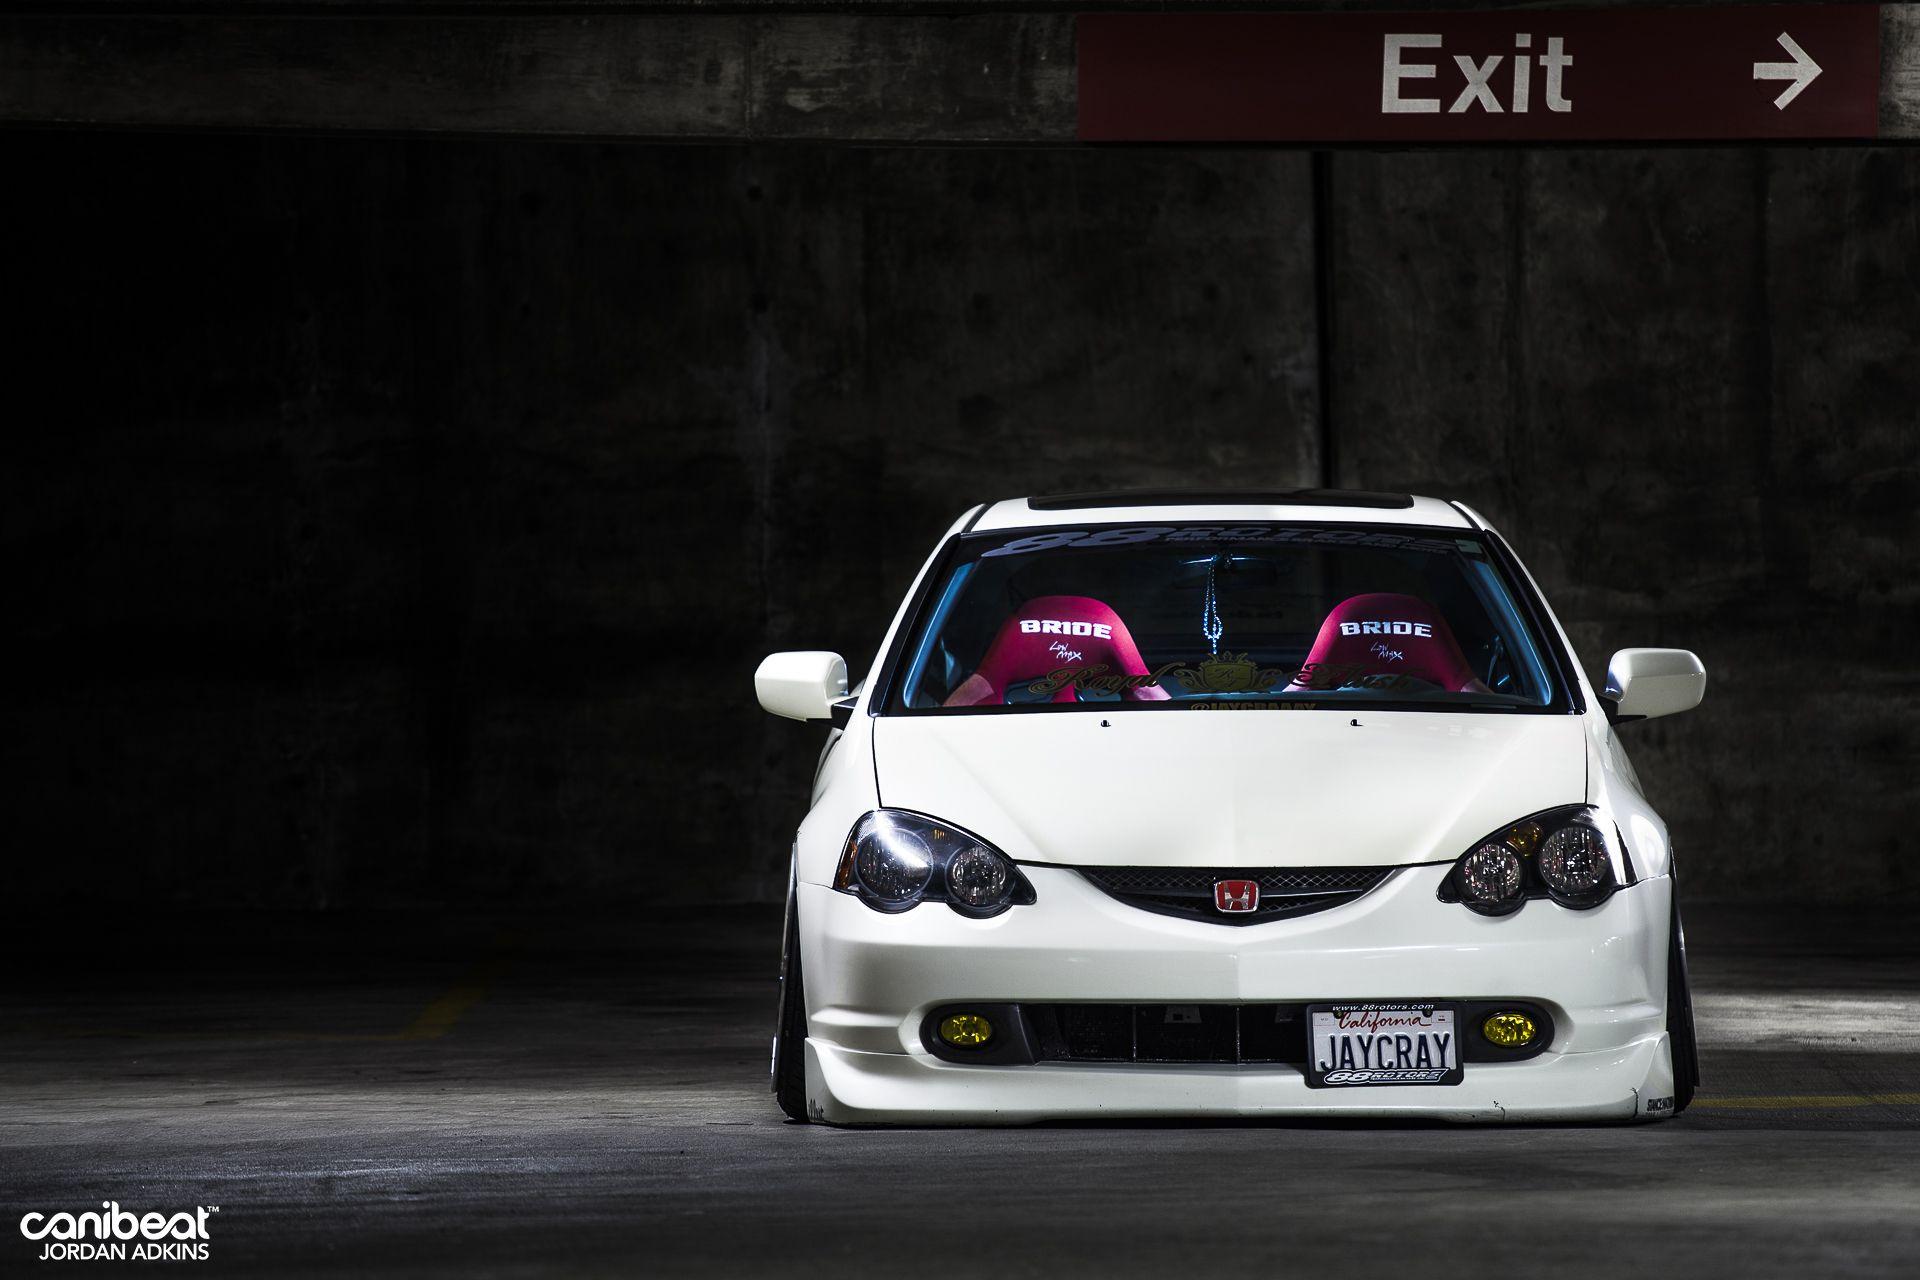 bagged rsx. Autohaus. Jdm, Jdm cars and Dream cars